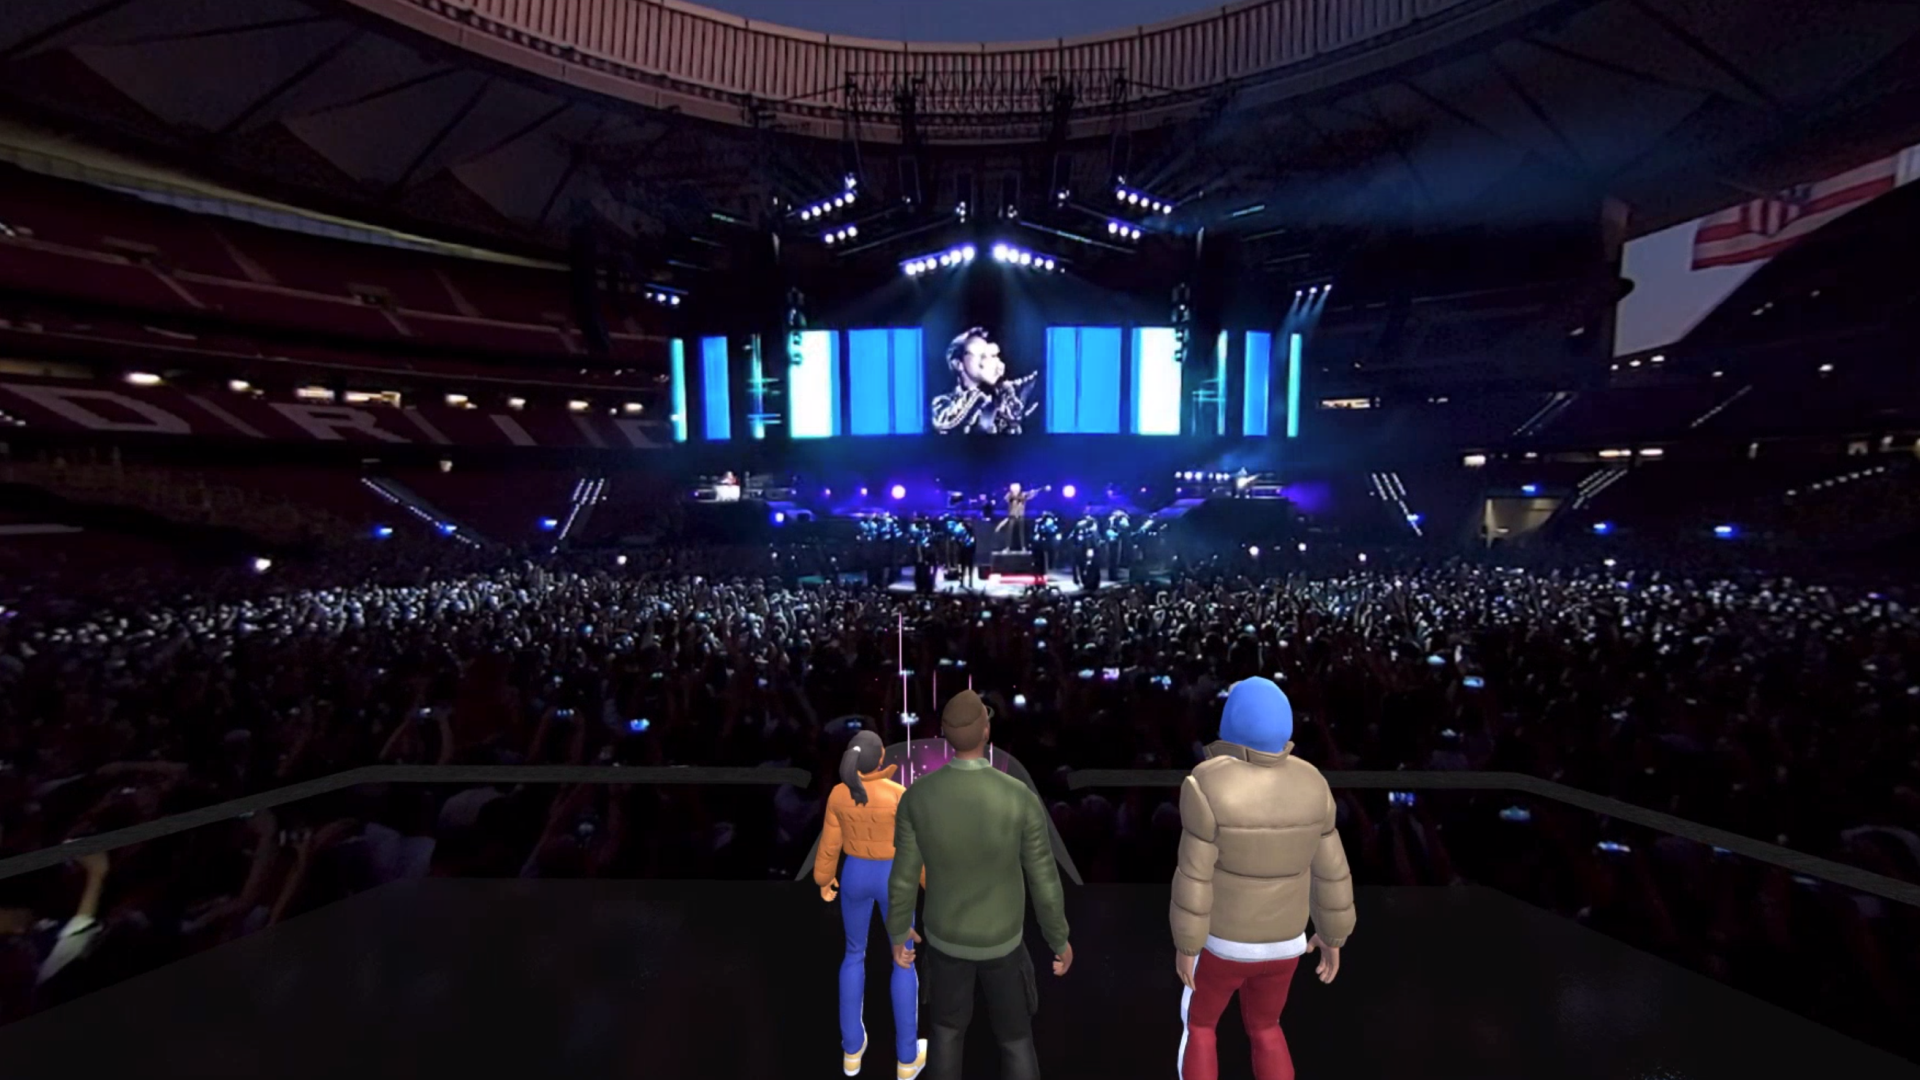 Avatars standing in front of virtual stage